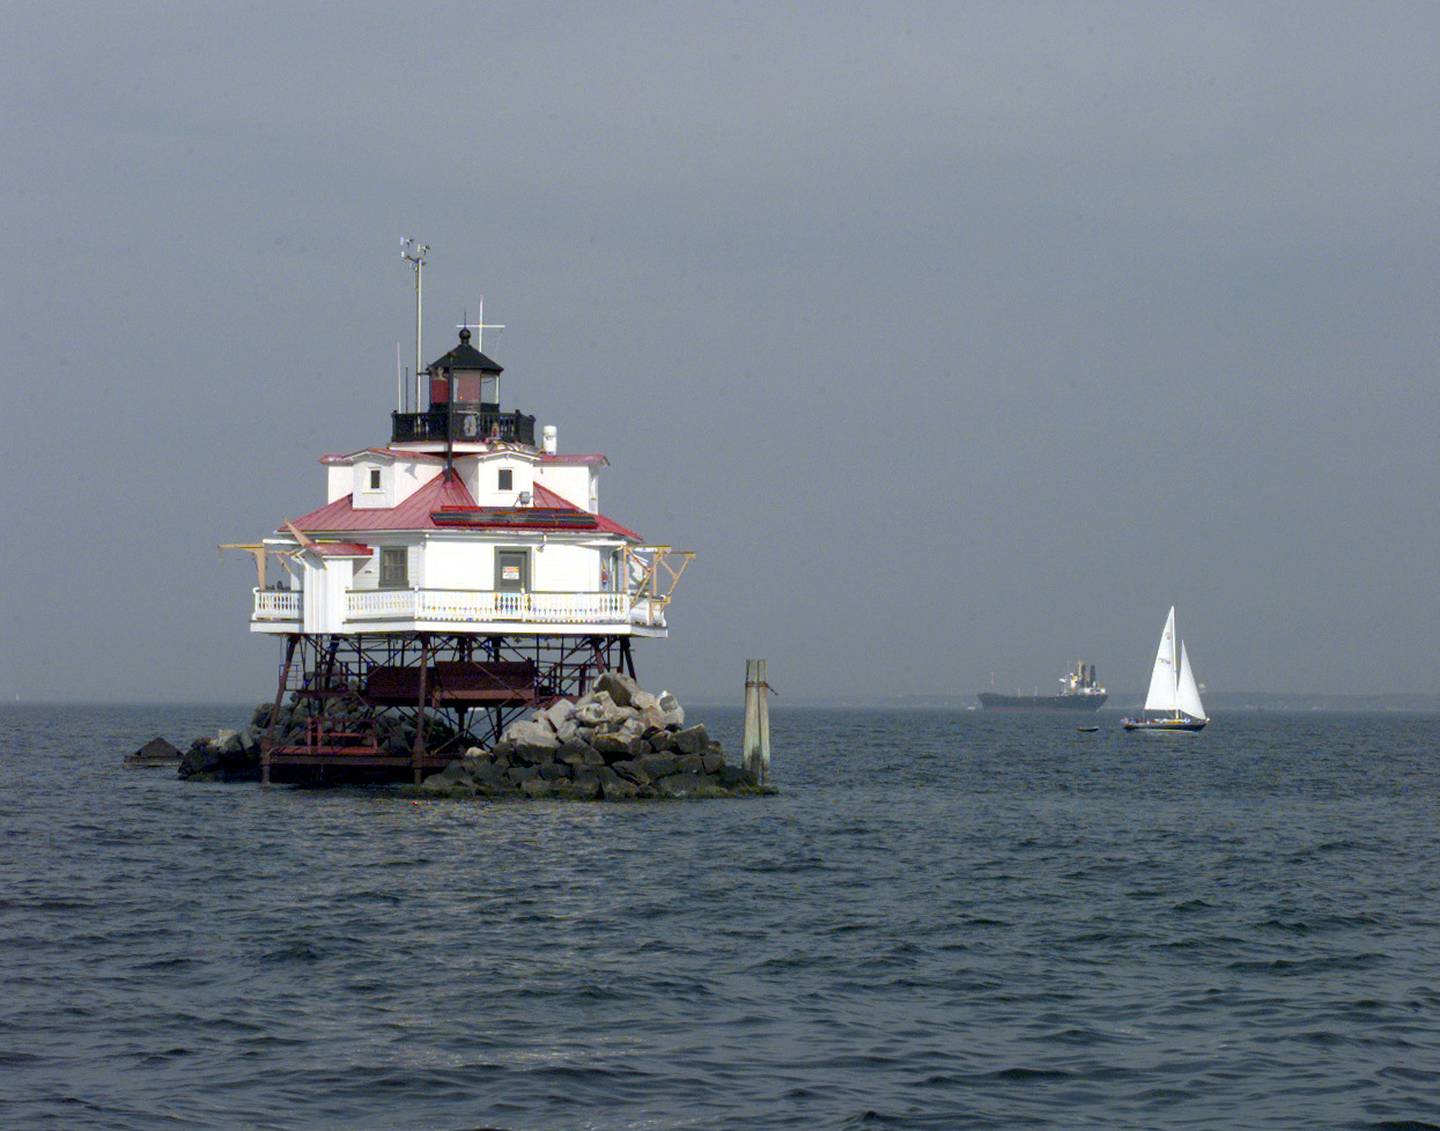 A sailboat cruises by the Thomas Point Shoal Light near Annapolis. The 140-year-old lighthouse is one of four sites proposed for a new national park on the Chesapeake Bay.